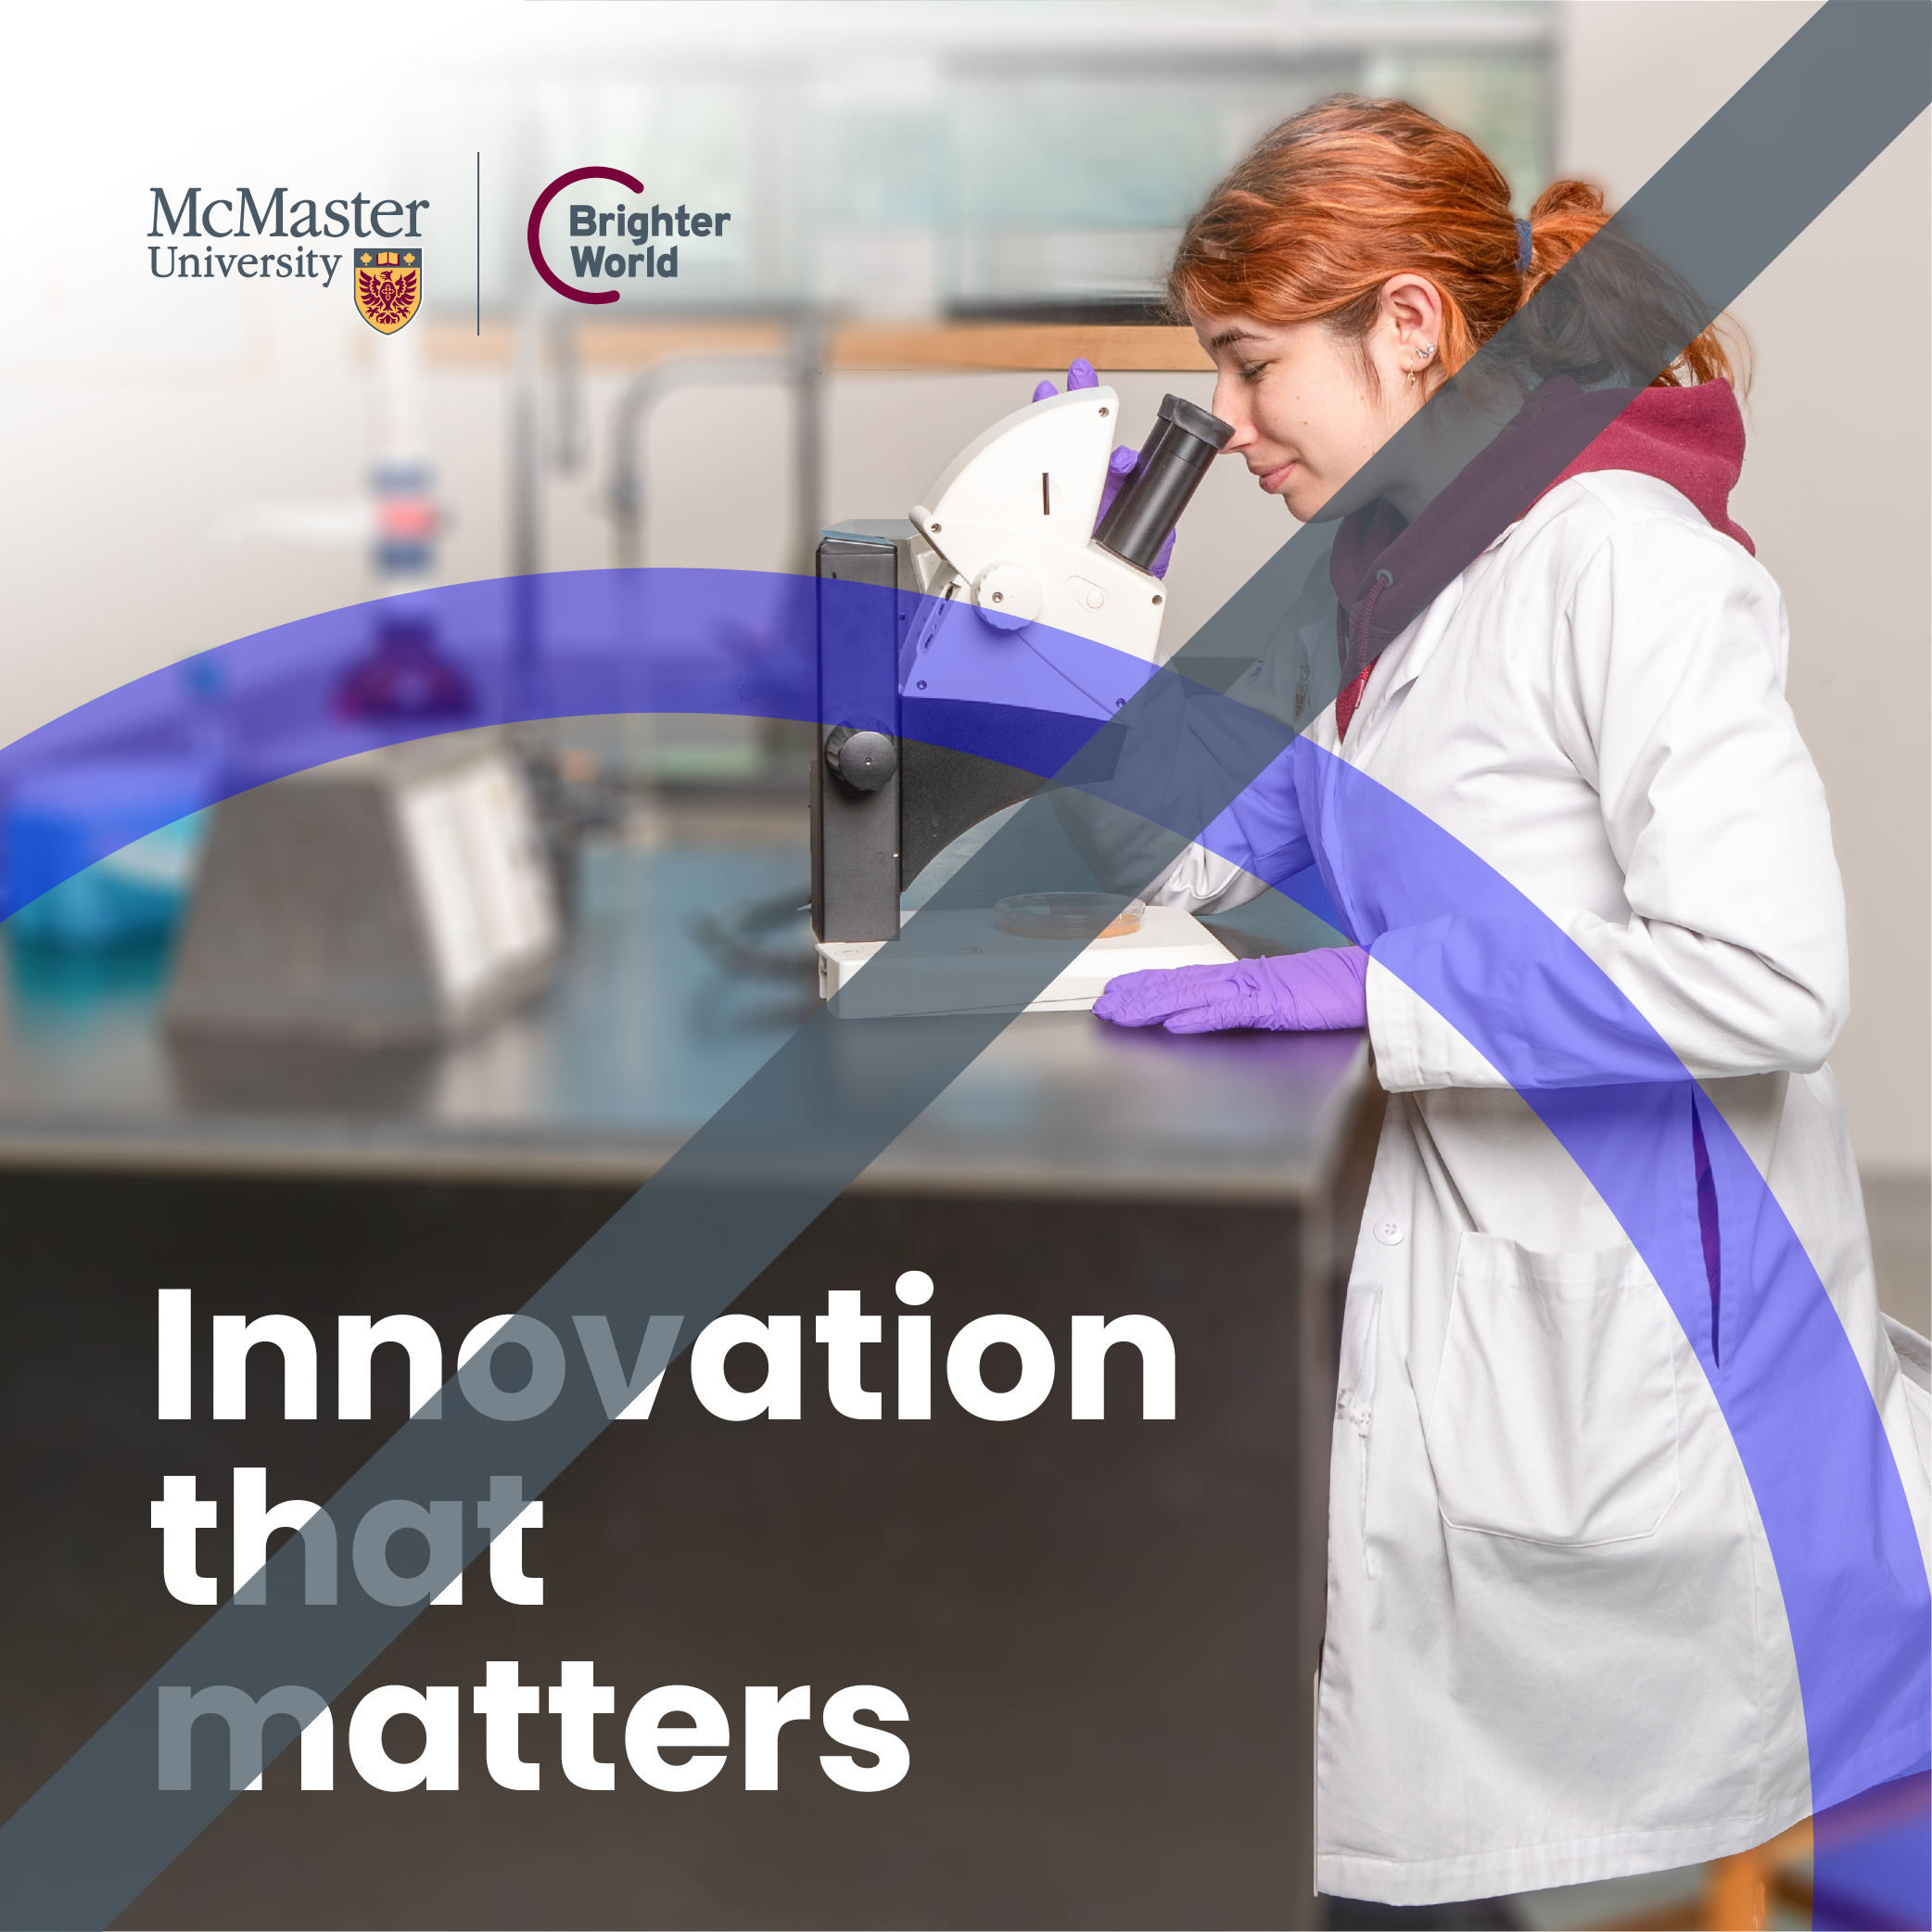 A visual example of what not to do with the circle element. A photo of a student looking into a microscope. The copy says "Innovation that matters." There is a transparent purple circle that highlights the copy. In the top left corner, there is a McMaster and Brighter World logo lockup. Through the image, there is a solid grey line from the top right corner to the bottom left indicating that the creative is not on brand. 